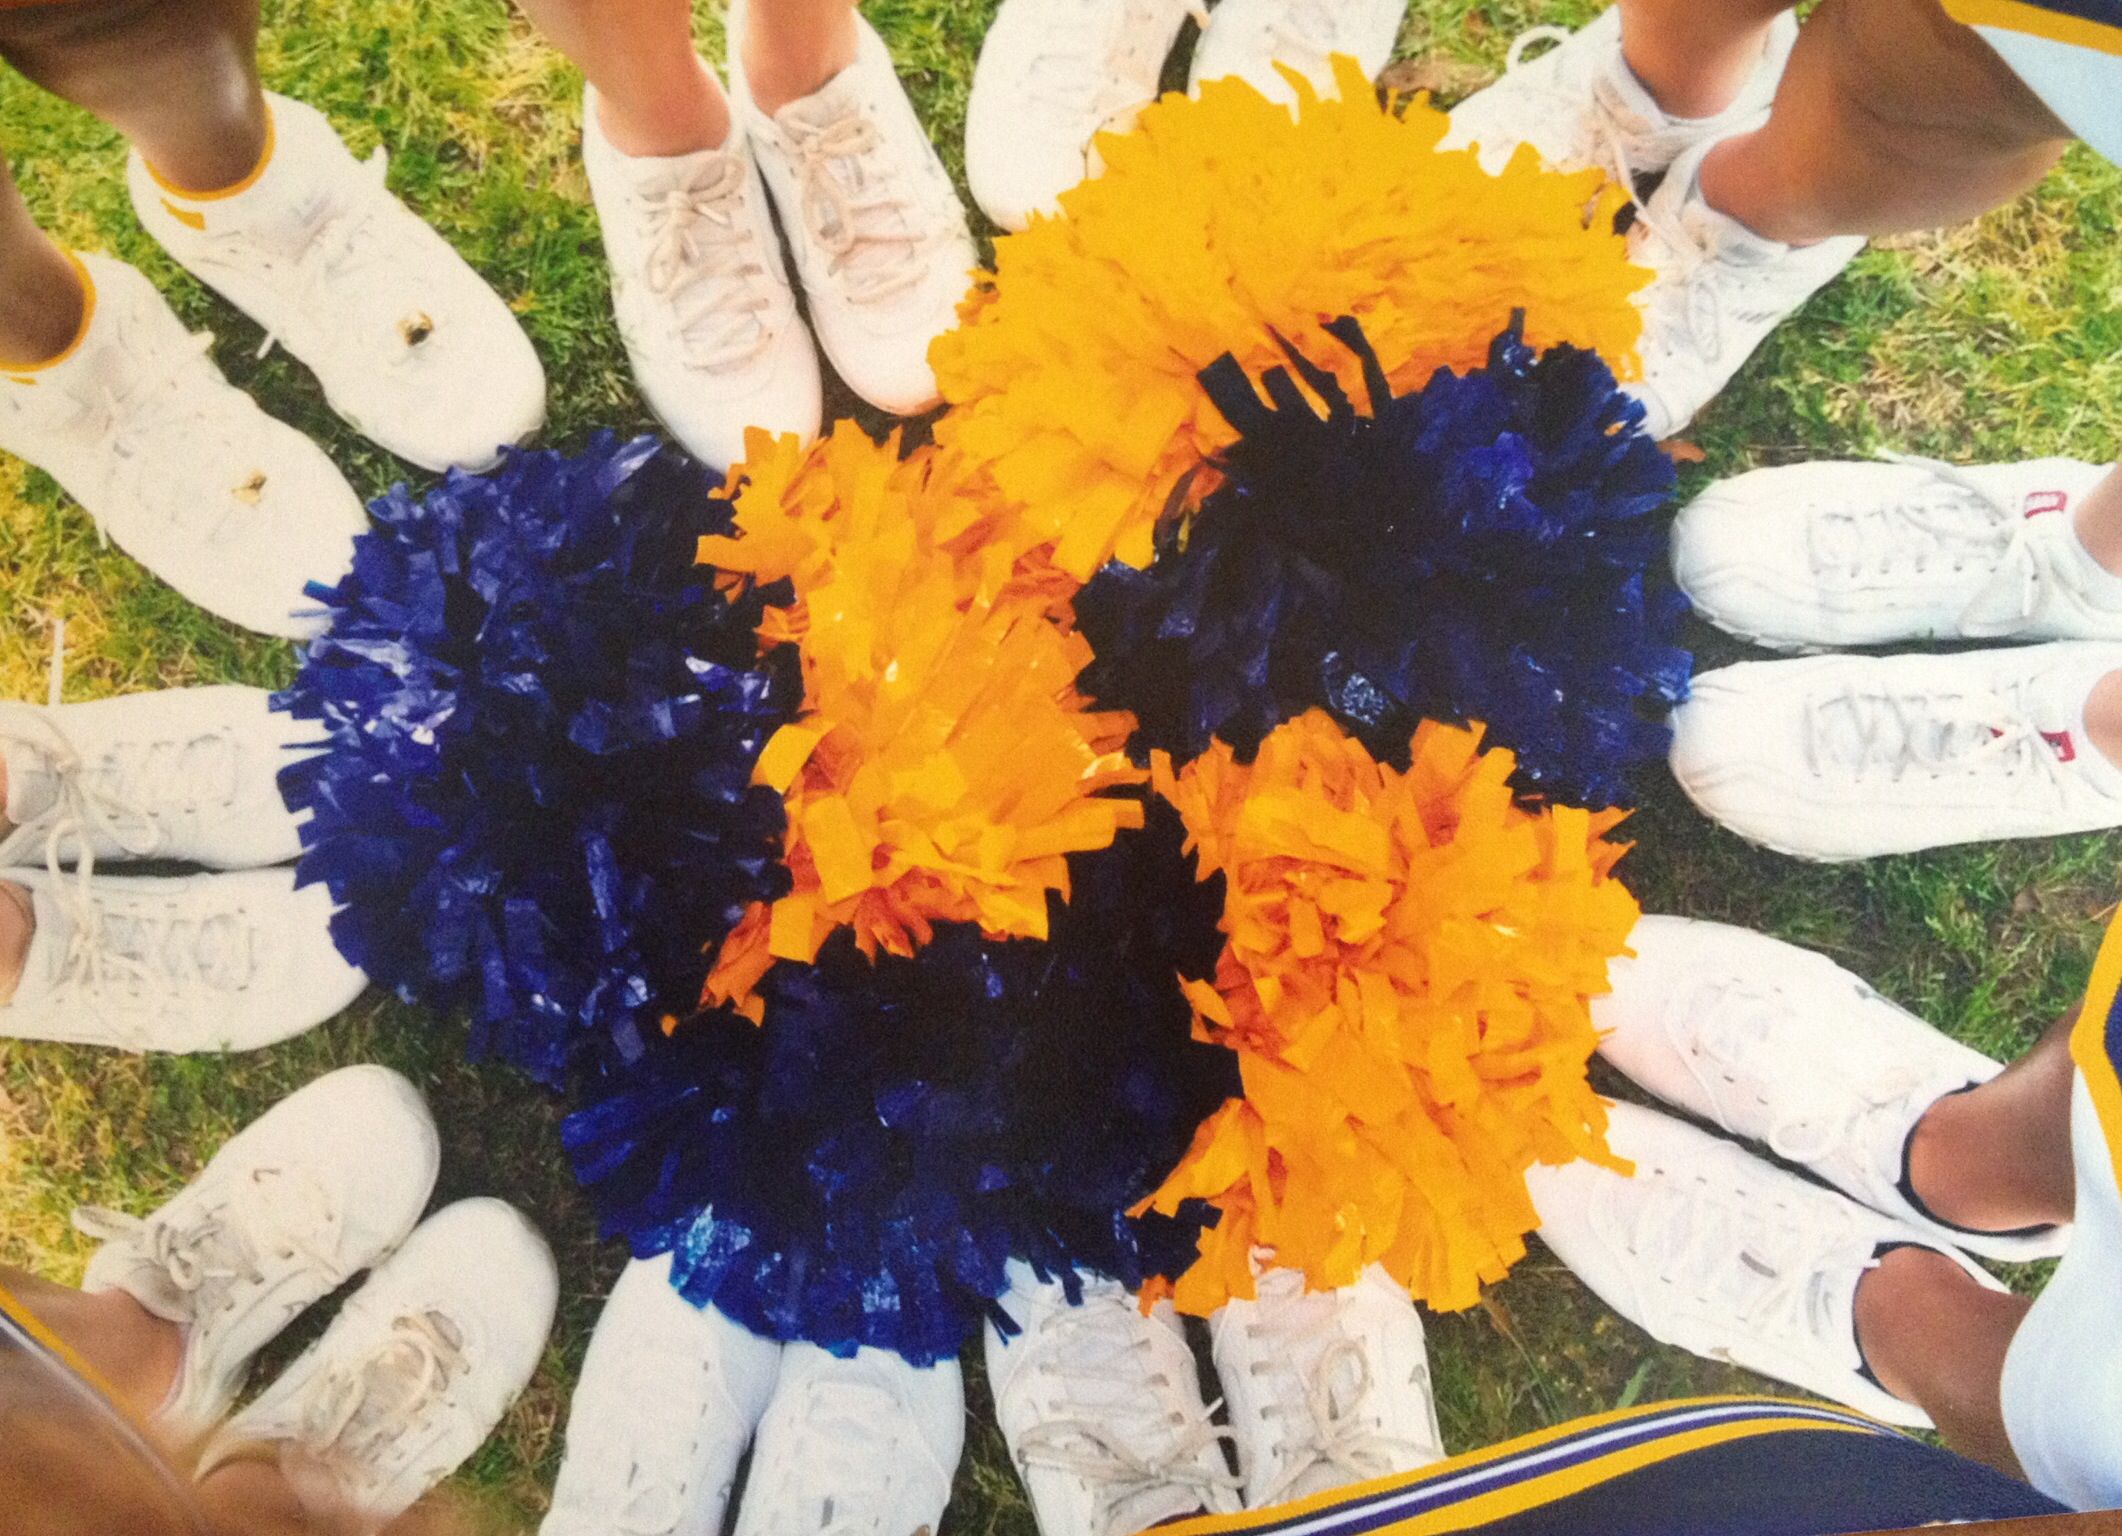 Cheer Picture Ideas! Heart Out Of Cheer Pom Poms! #heart #cheer. Cheer Picture, Cheer Pom Poms, Cheer